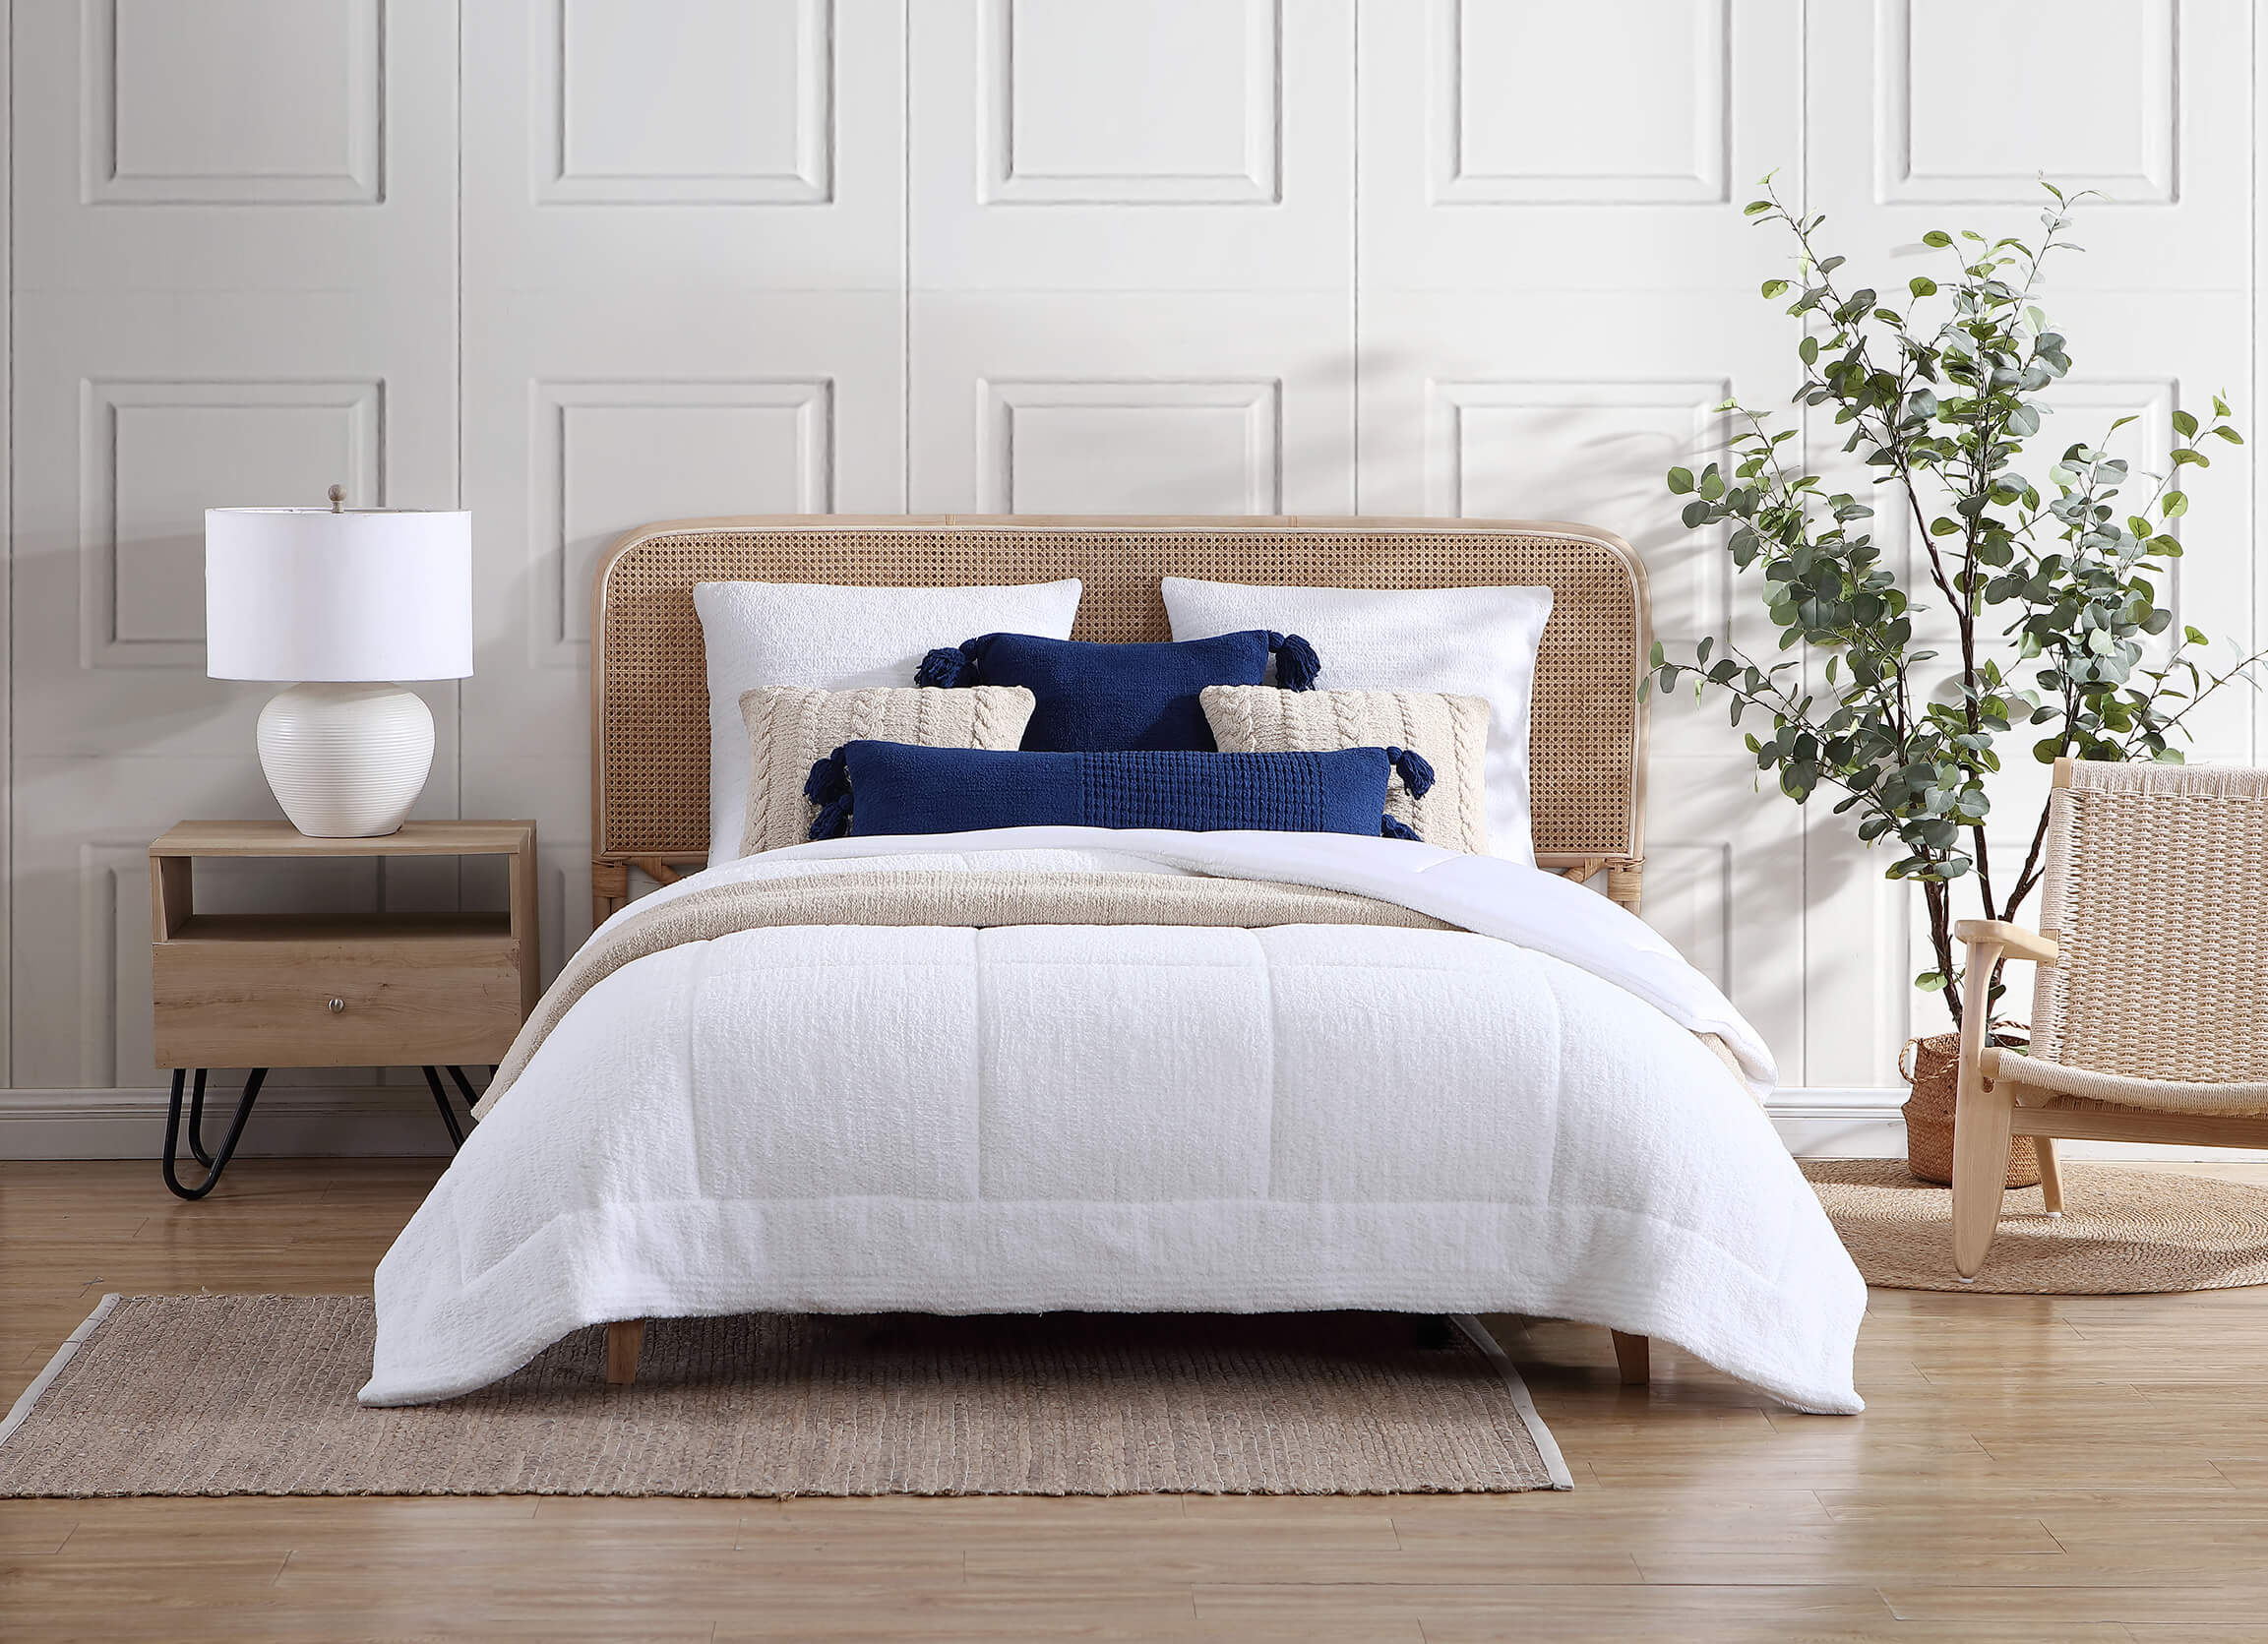 Comforter vs. Duvet. Sunday Citizen Snug Quilted Comforter in Clear White. Blue and Tan throw pillows on a white bedspread.